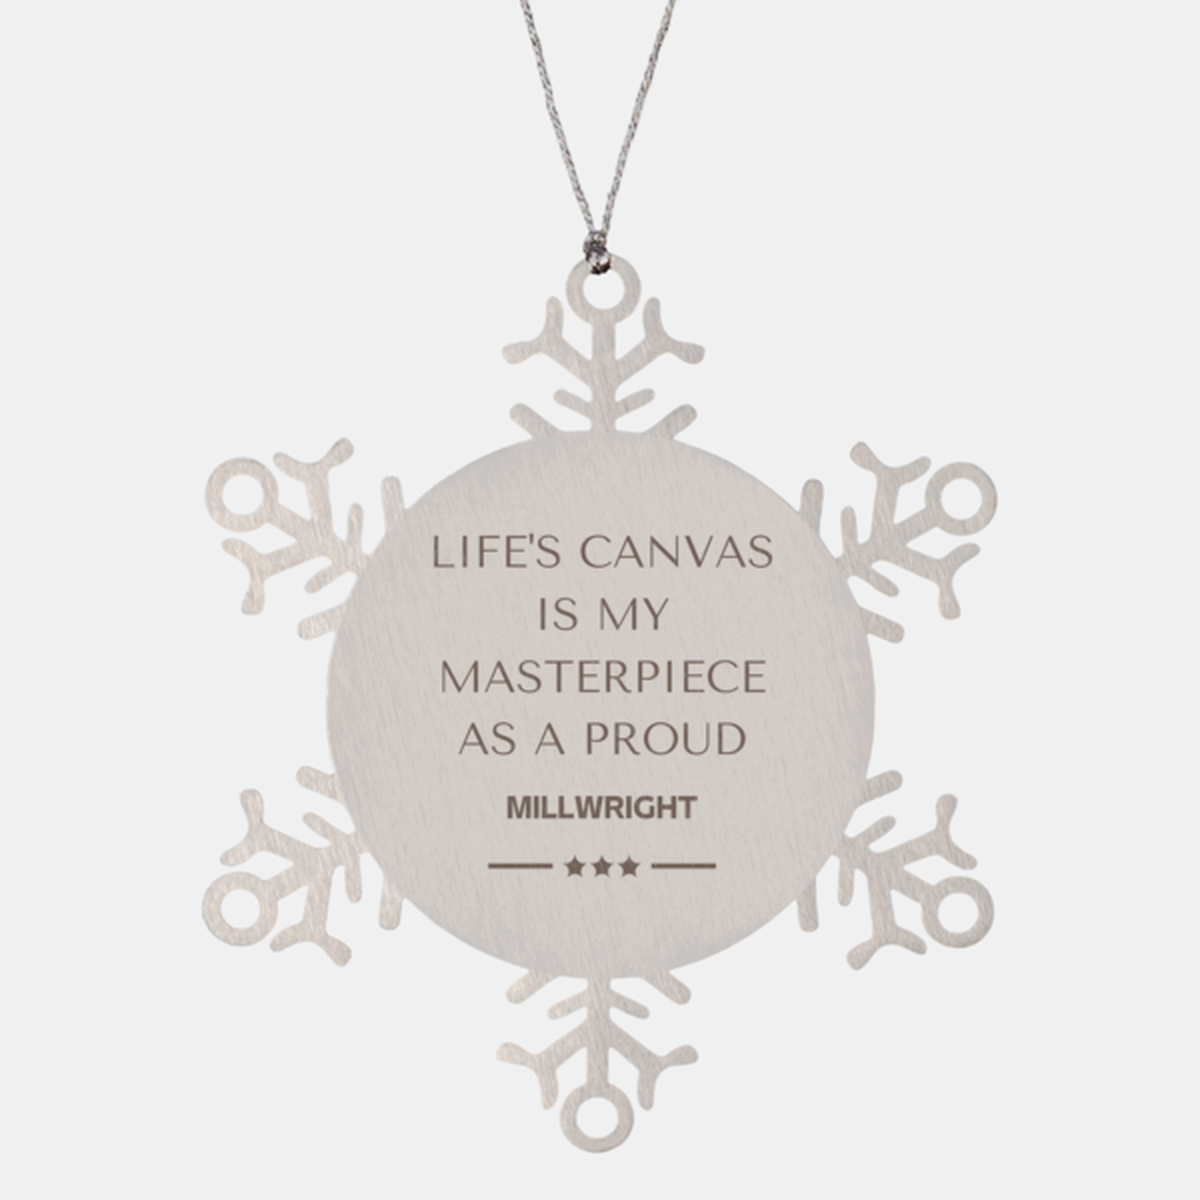 Proud Millwright Gifts, Life's canvas is my masterpiece, Epic Birthday Christmas Unique Snowflake Ornament For Millwright, Coworkers, Men, Women, Friends